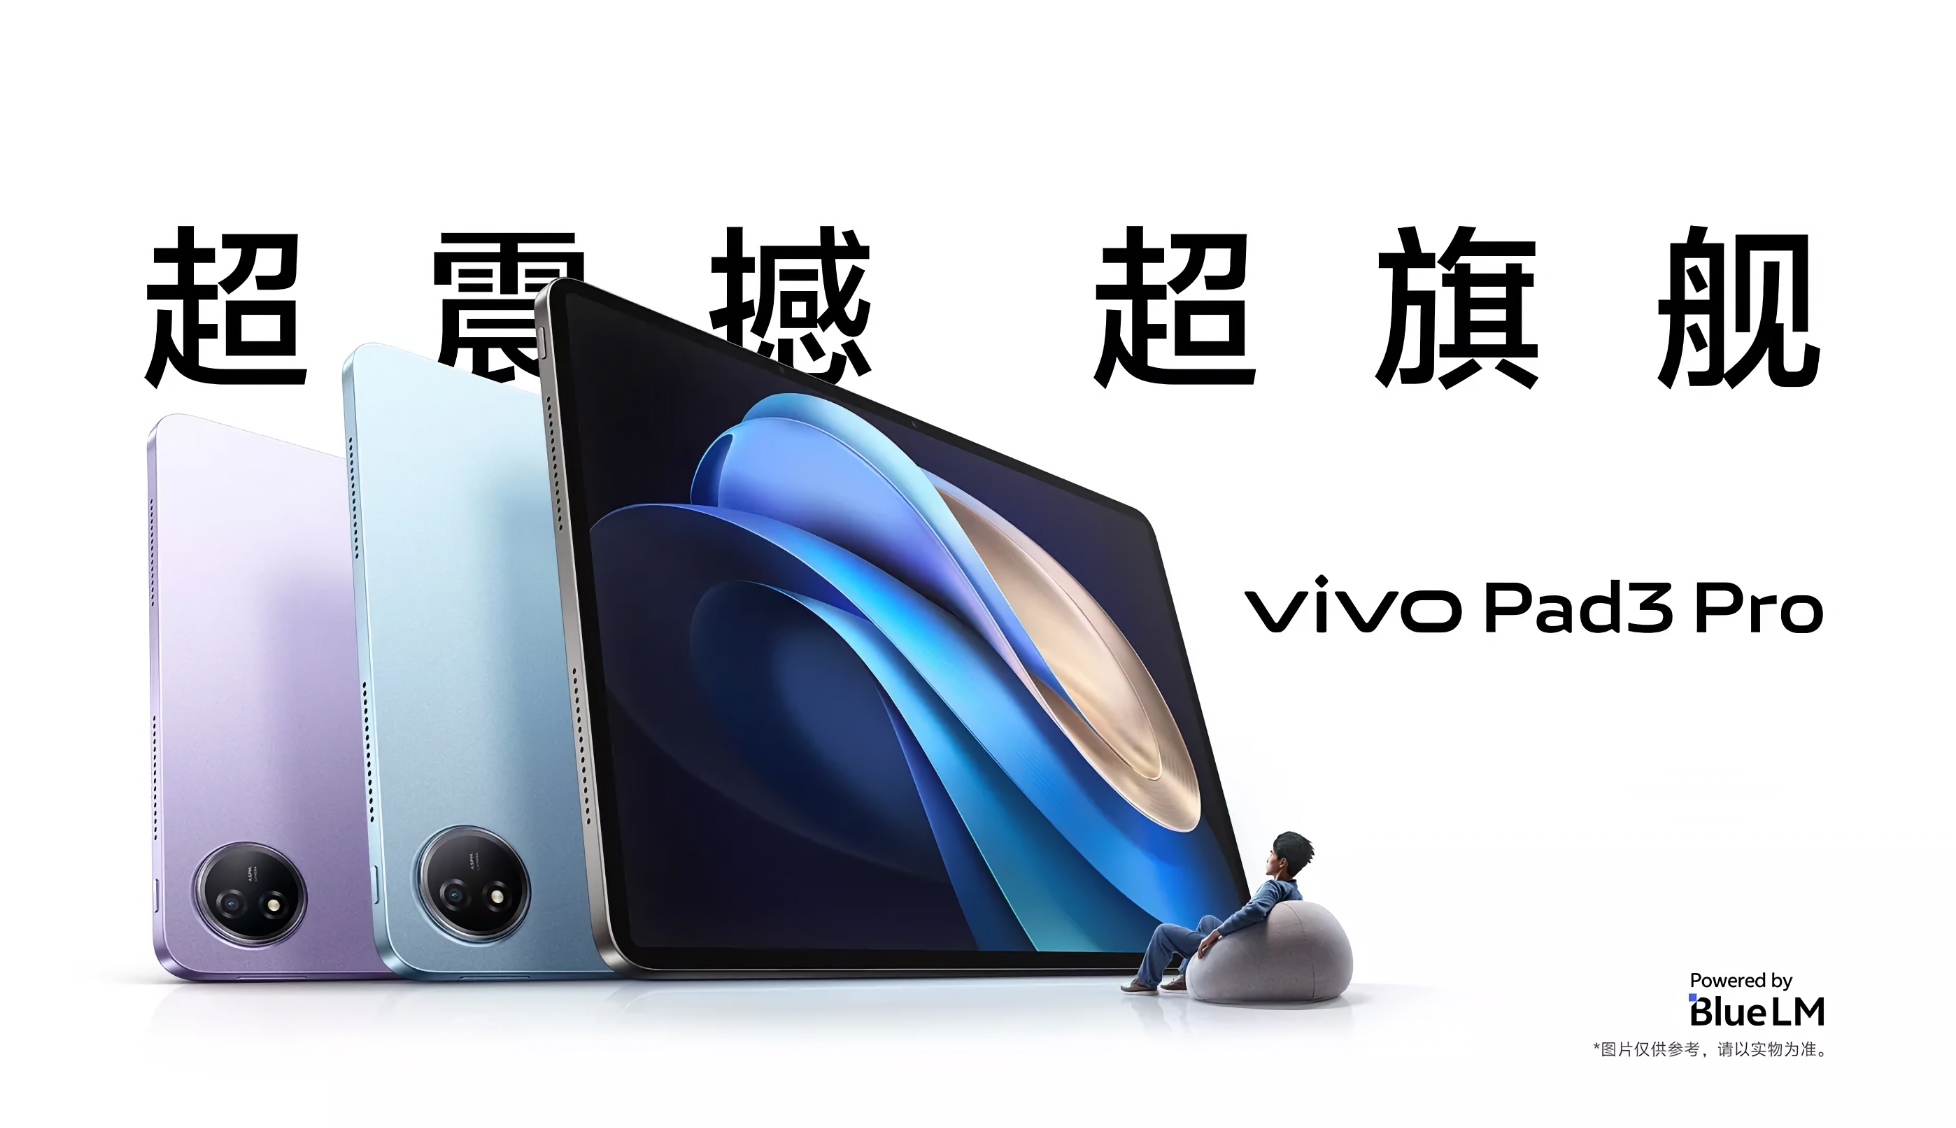 vivo Pad 3 Pro: 13-inch 144Hz display, MediaTek Dimensity 9300 chip, 11,500mAh battery with 66W charging and price from $415